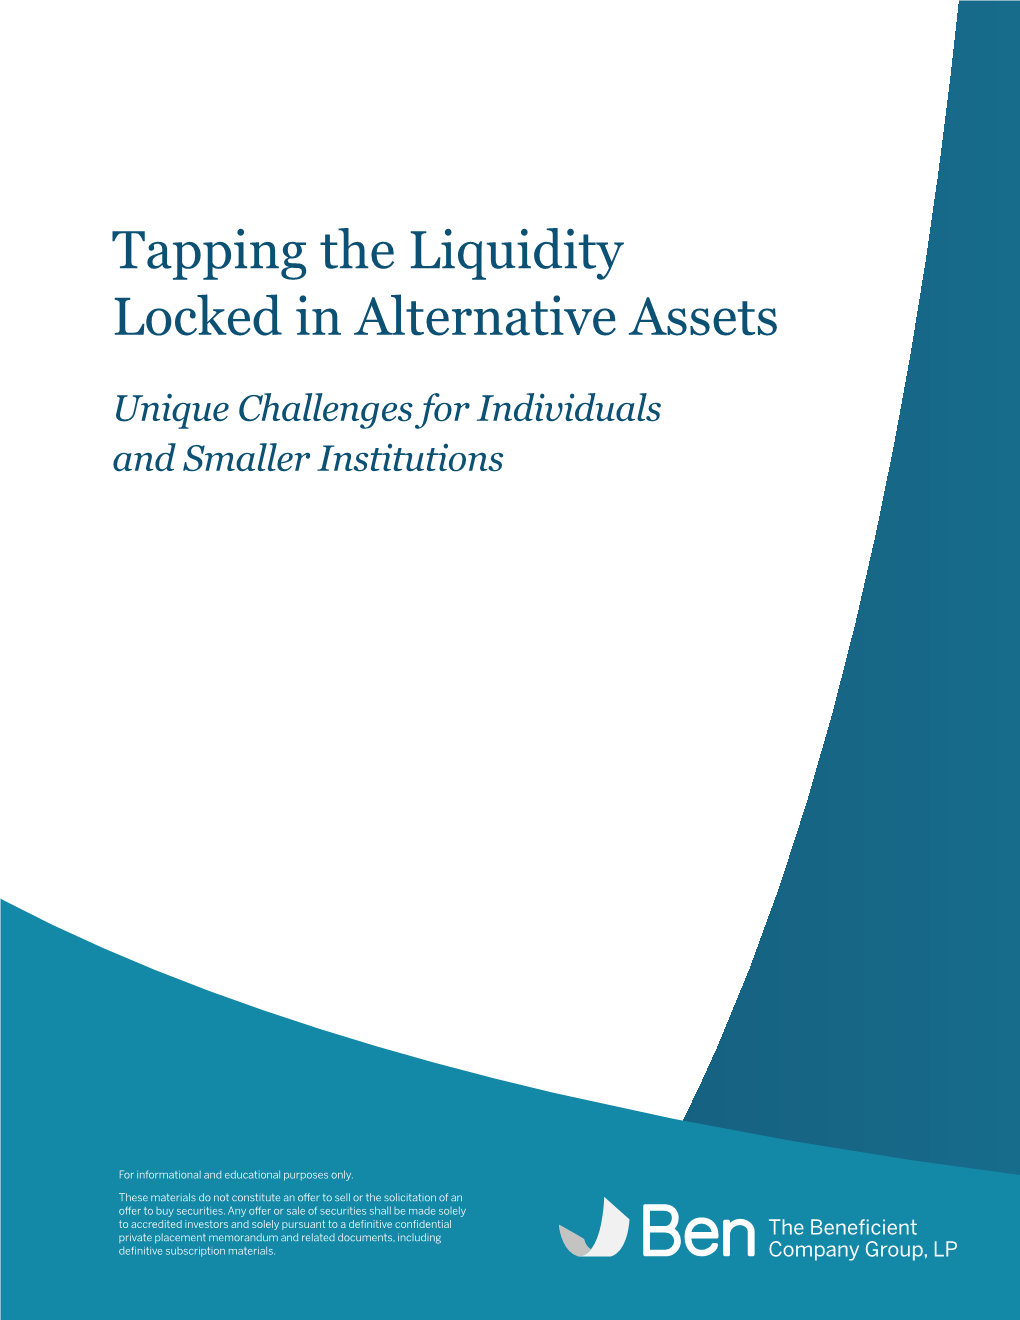 Tapping the Liquidity Locked in Alternative Assets